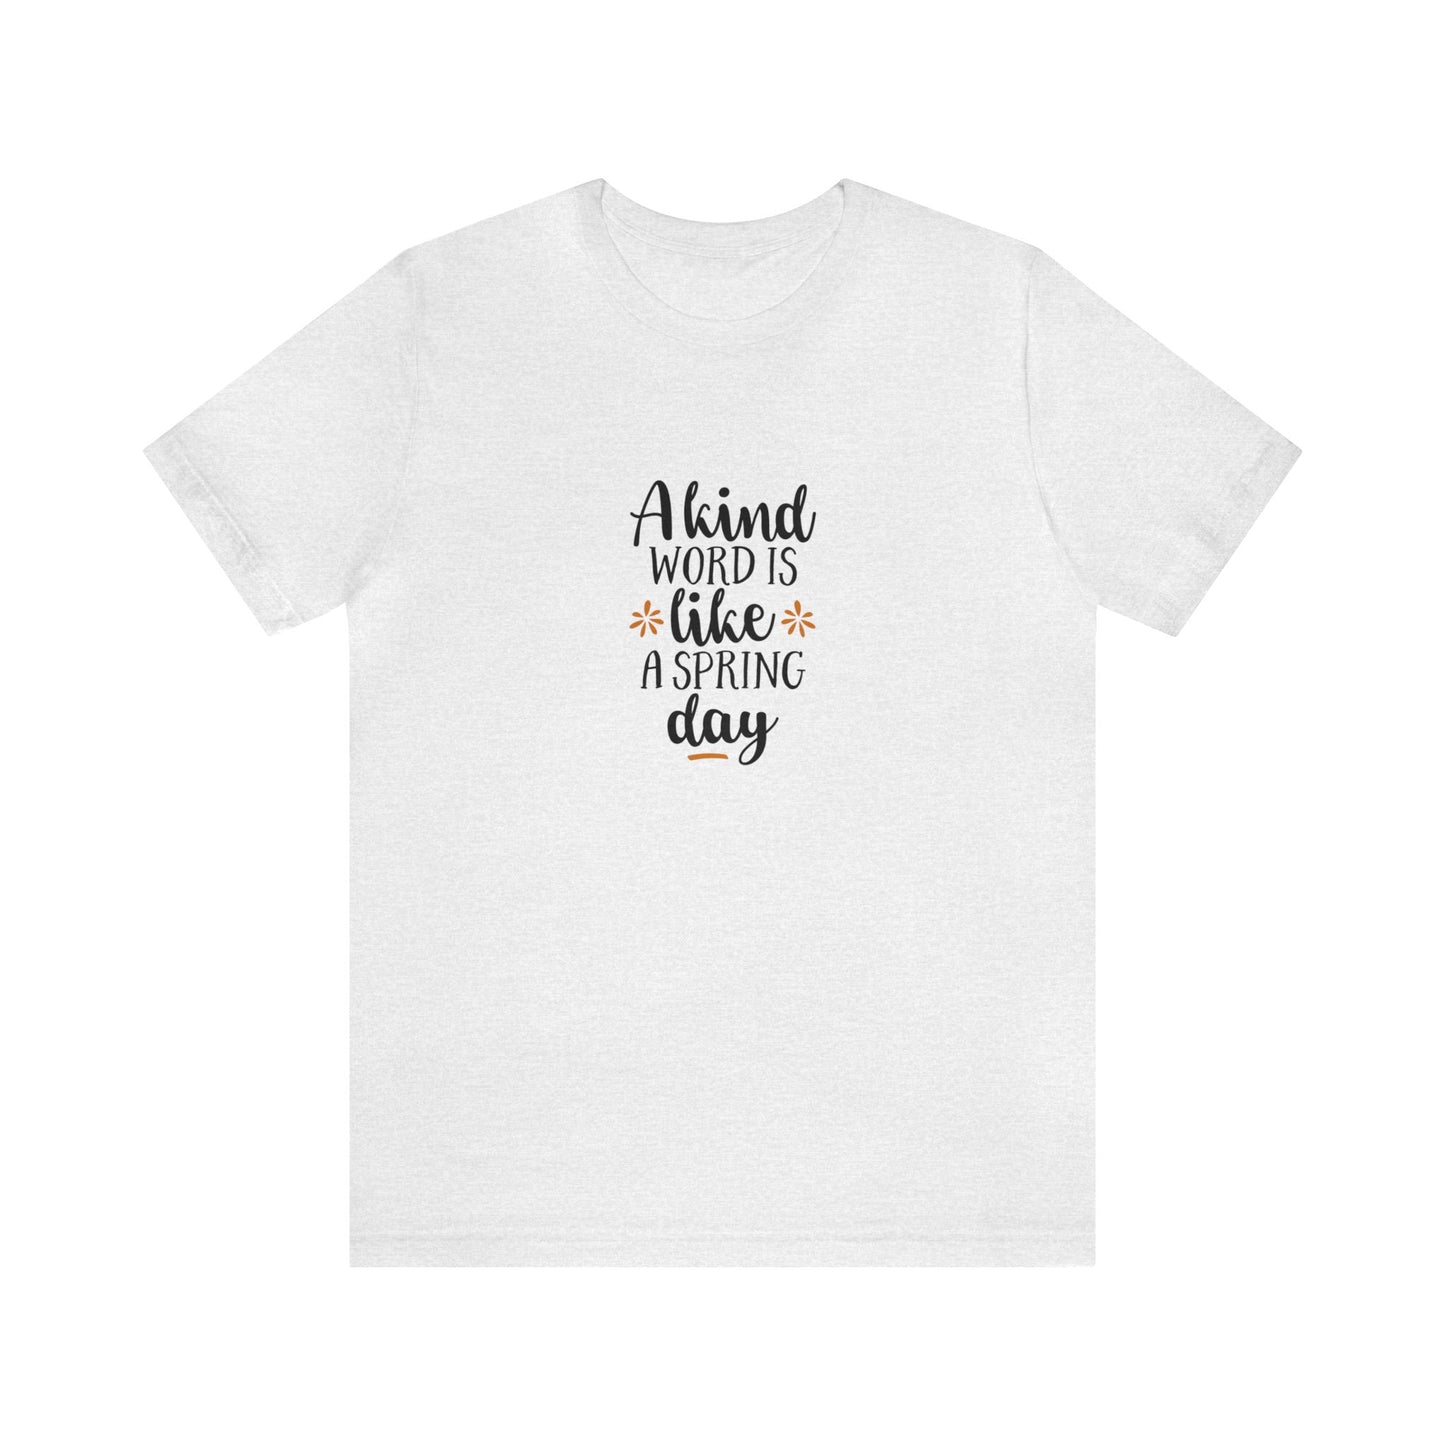 A Kind Word is Like a Spring Day Jersey T-Shirt